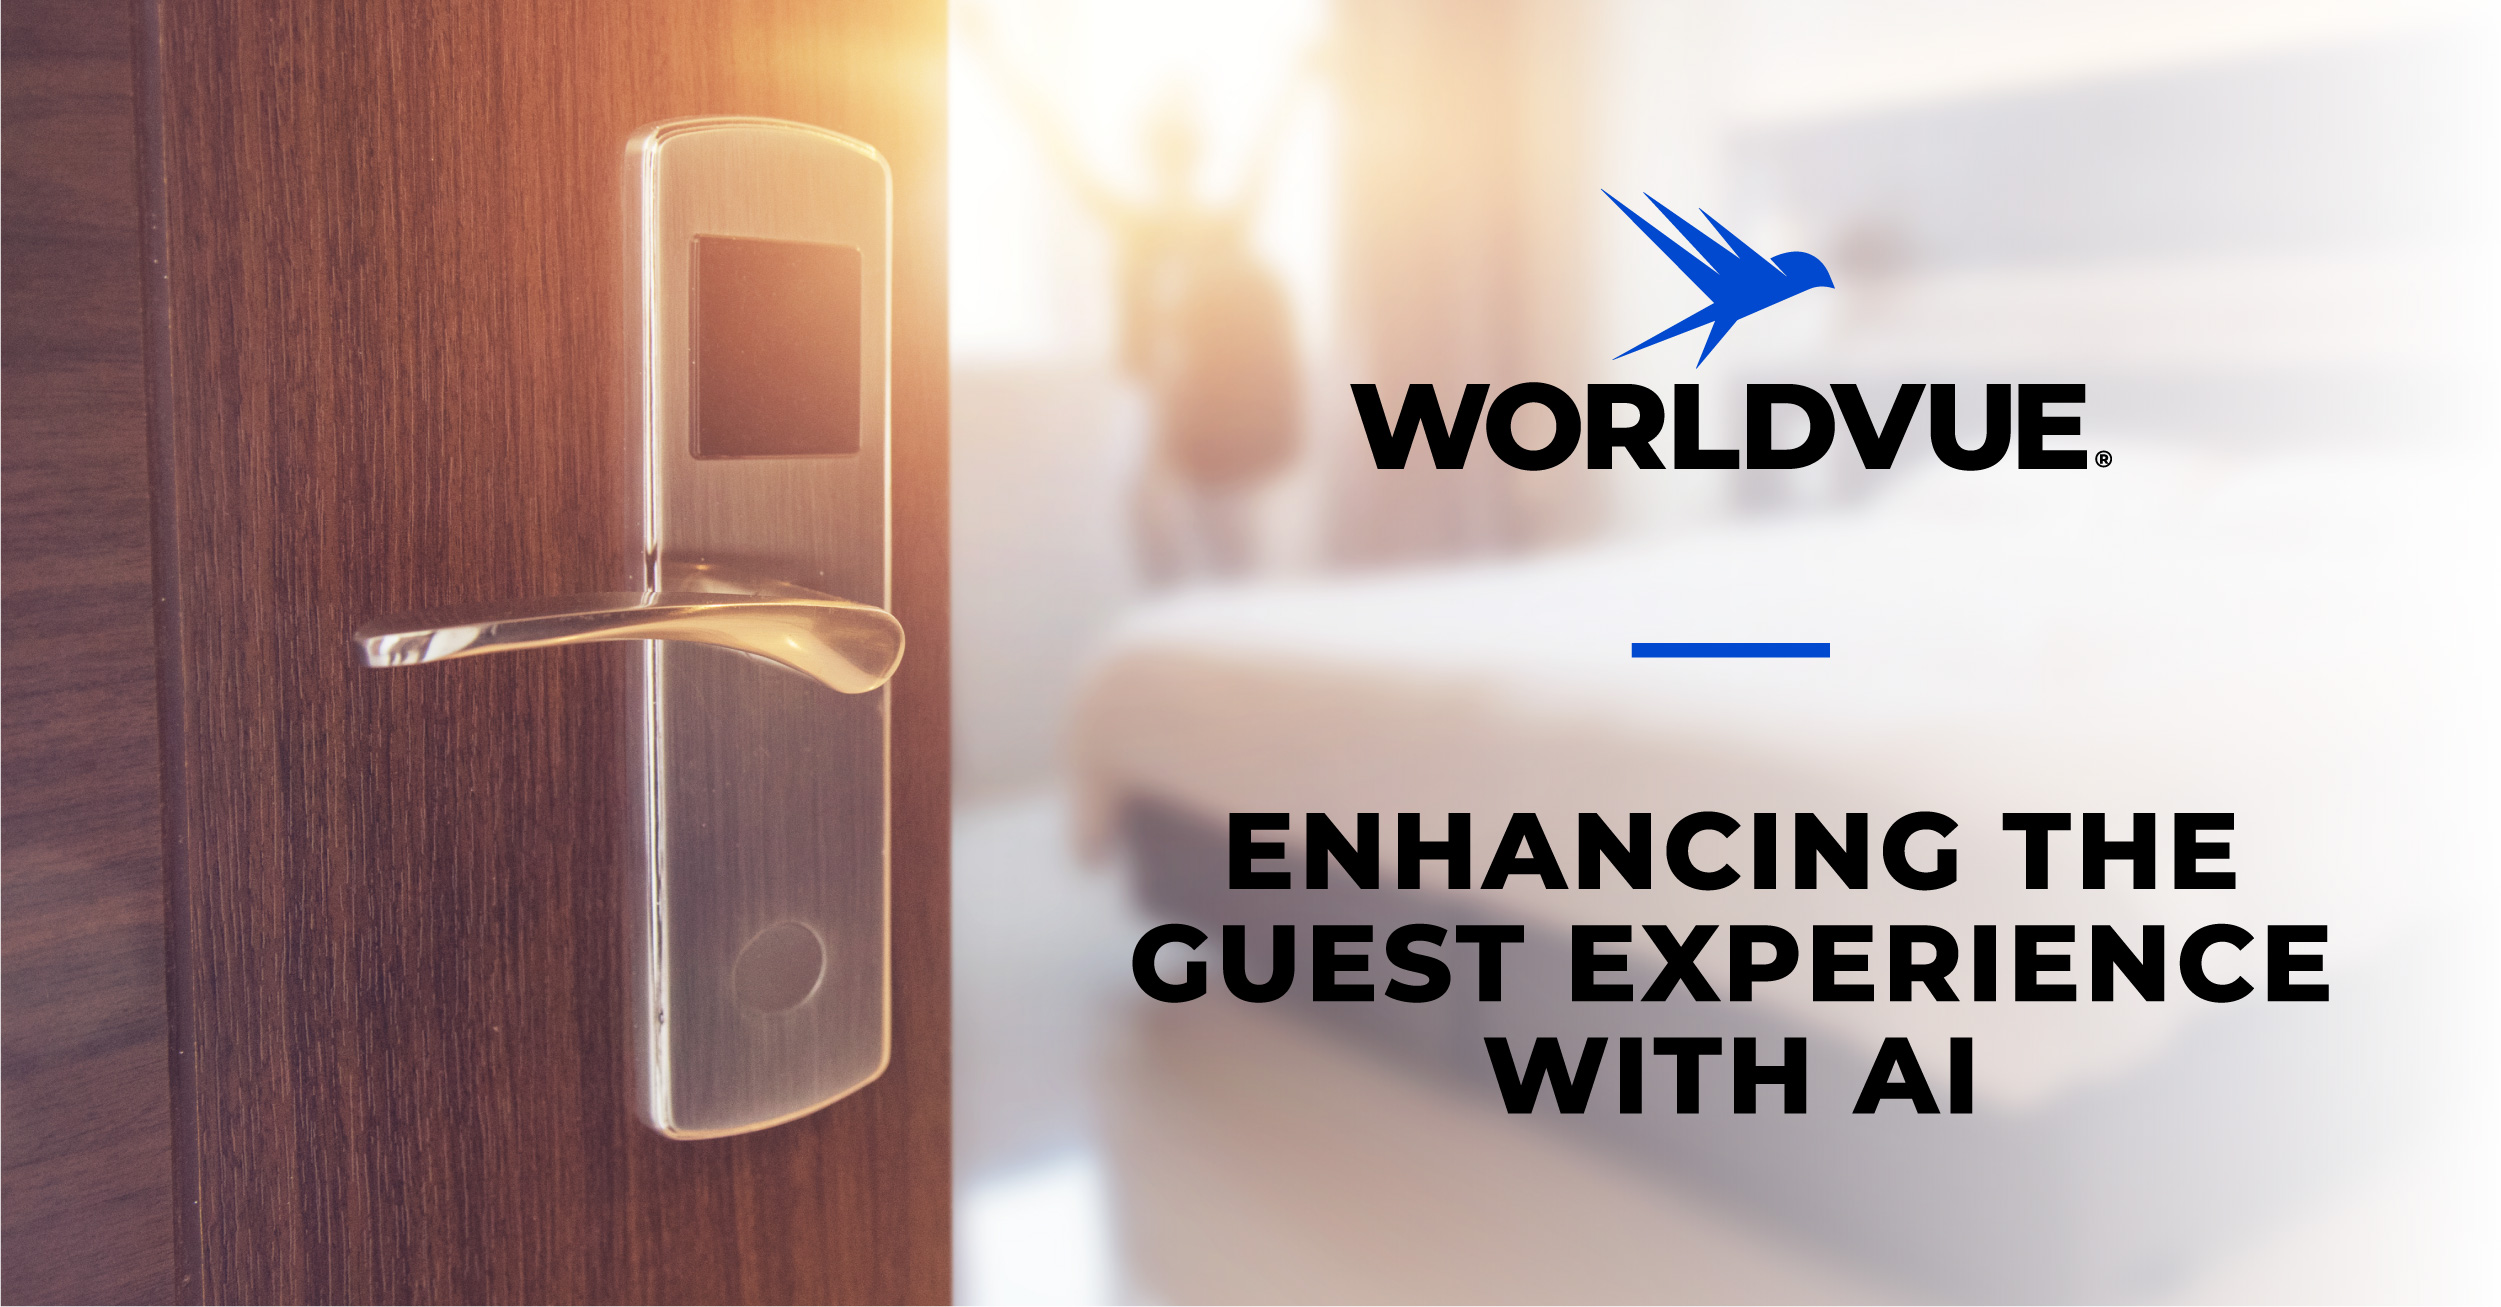 entryway to guest room in background, overlaid with WorldVue logo and tagline "Enhancing the Guest Experience with AI in Hospitality"